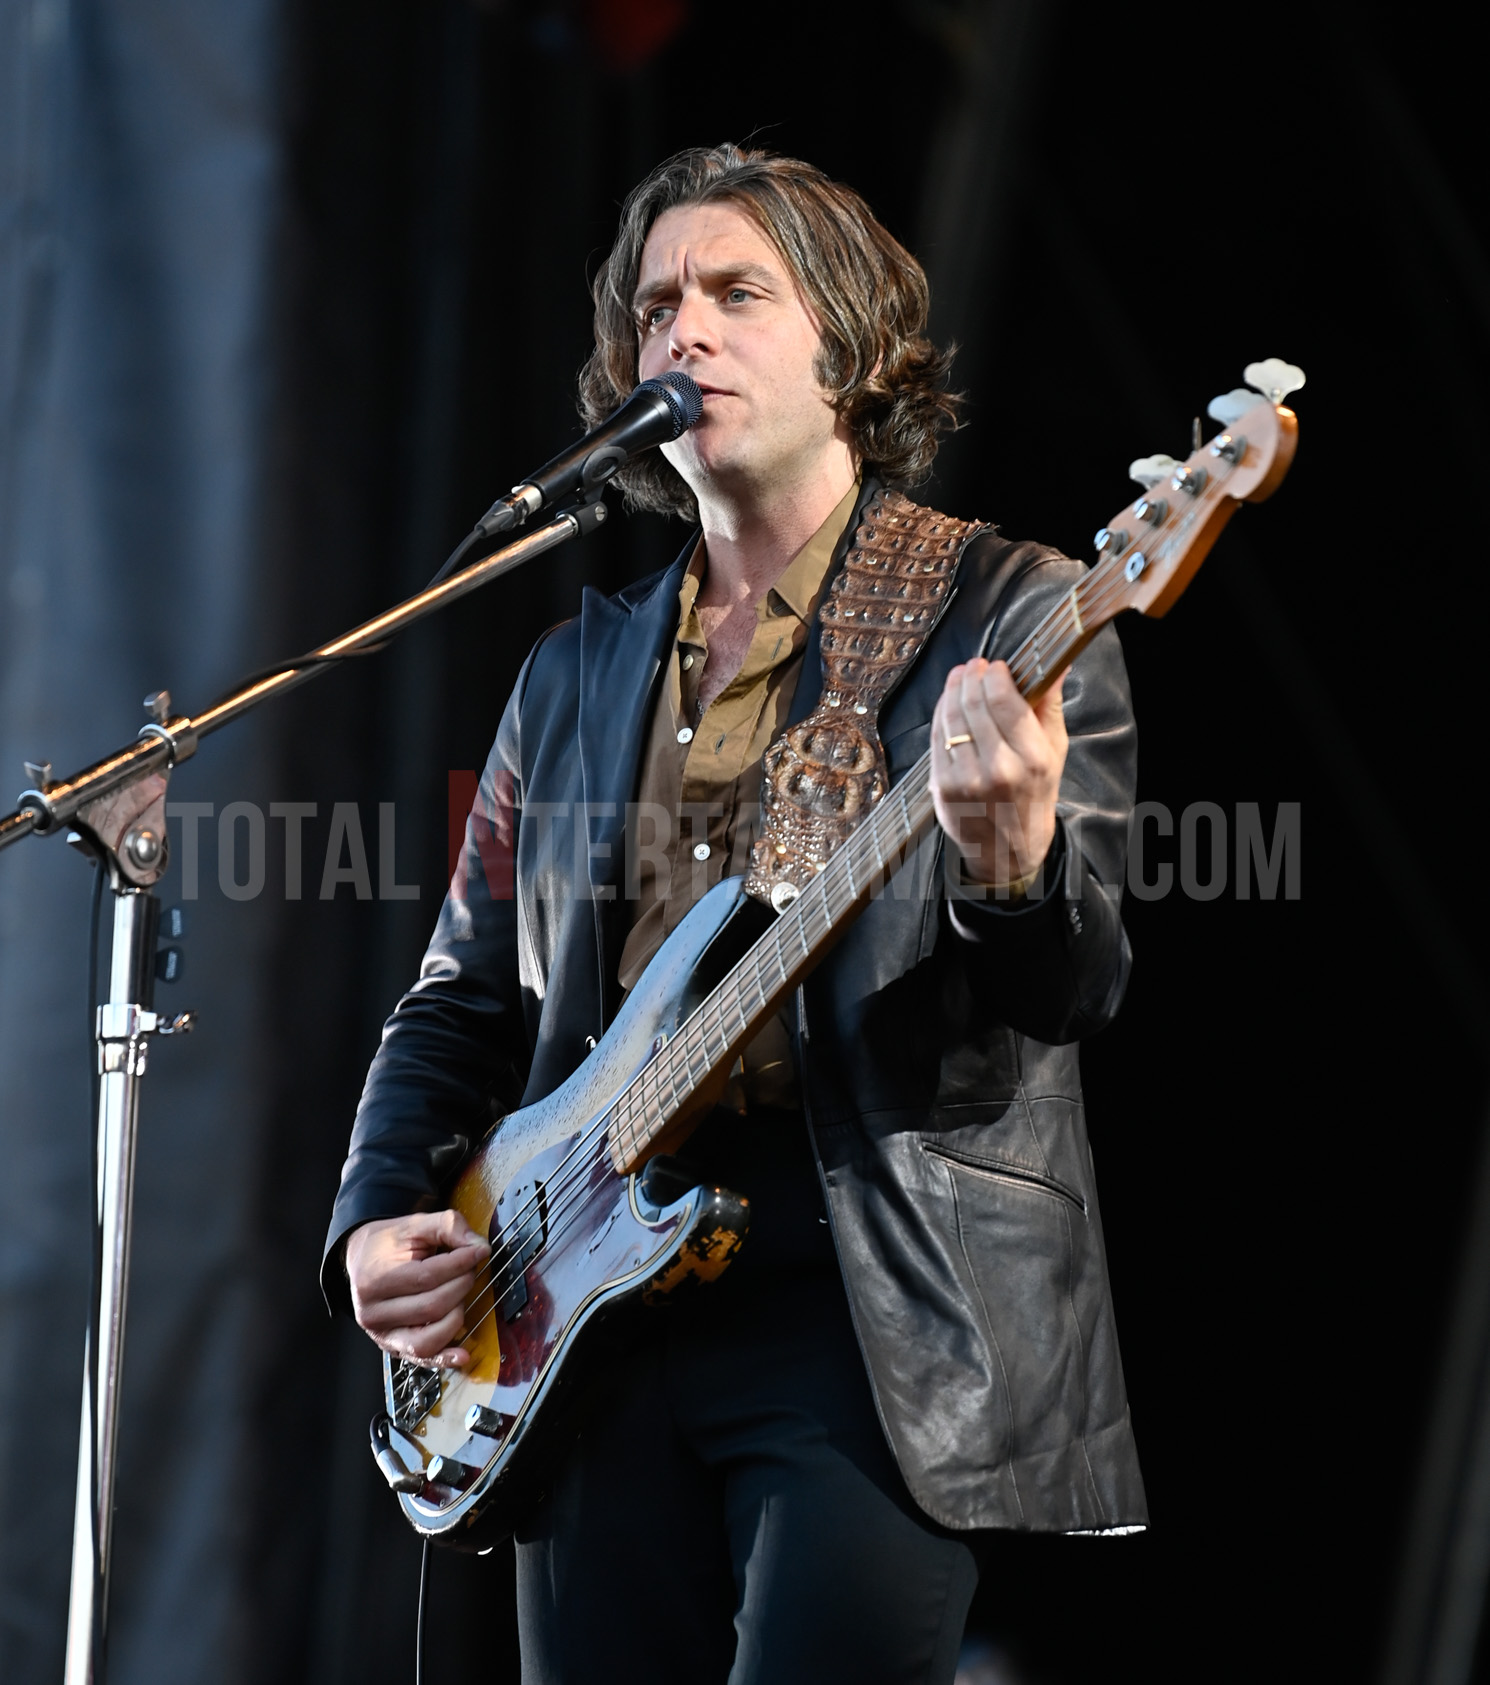 Live Event, Music, Stephen Farrell, Totalntertainment, Arctic Monkeys, Manchester, Music Photography